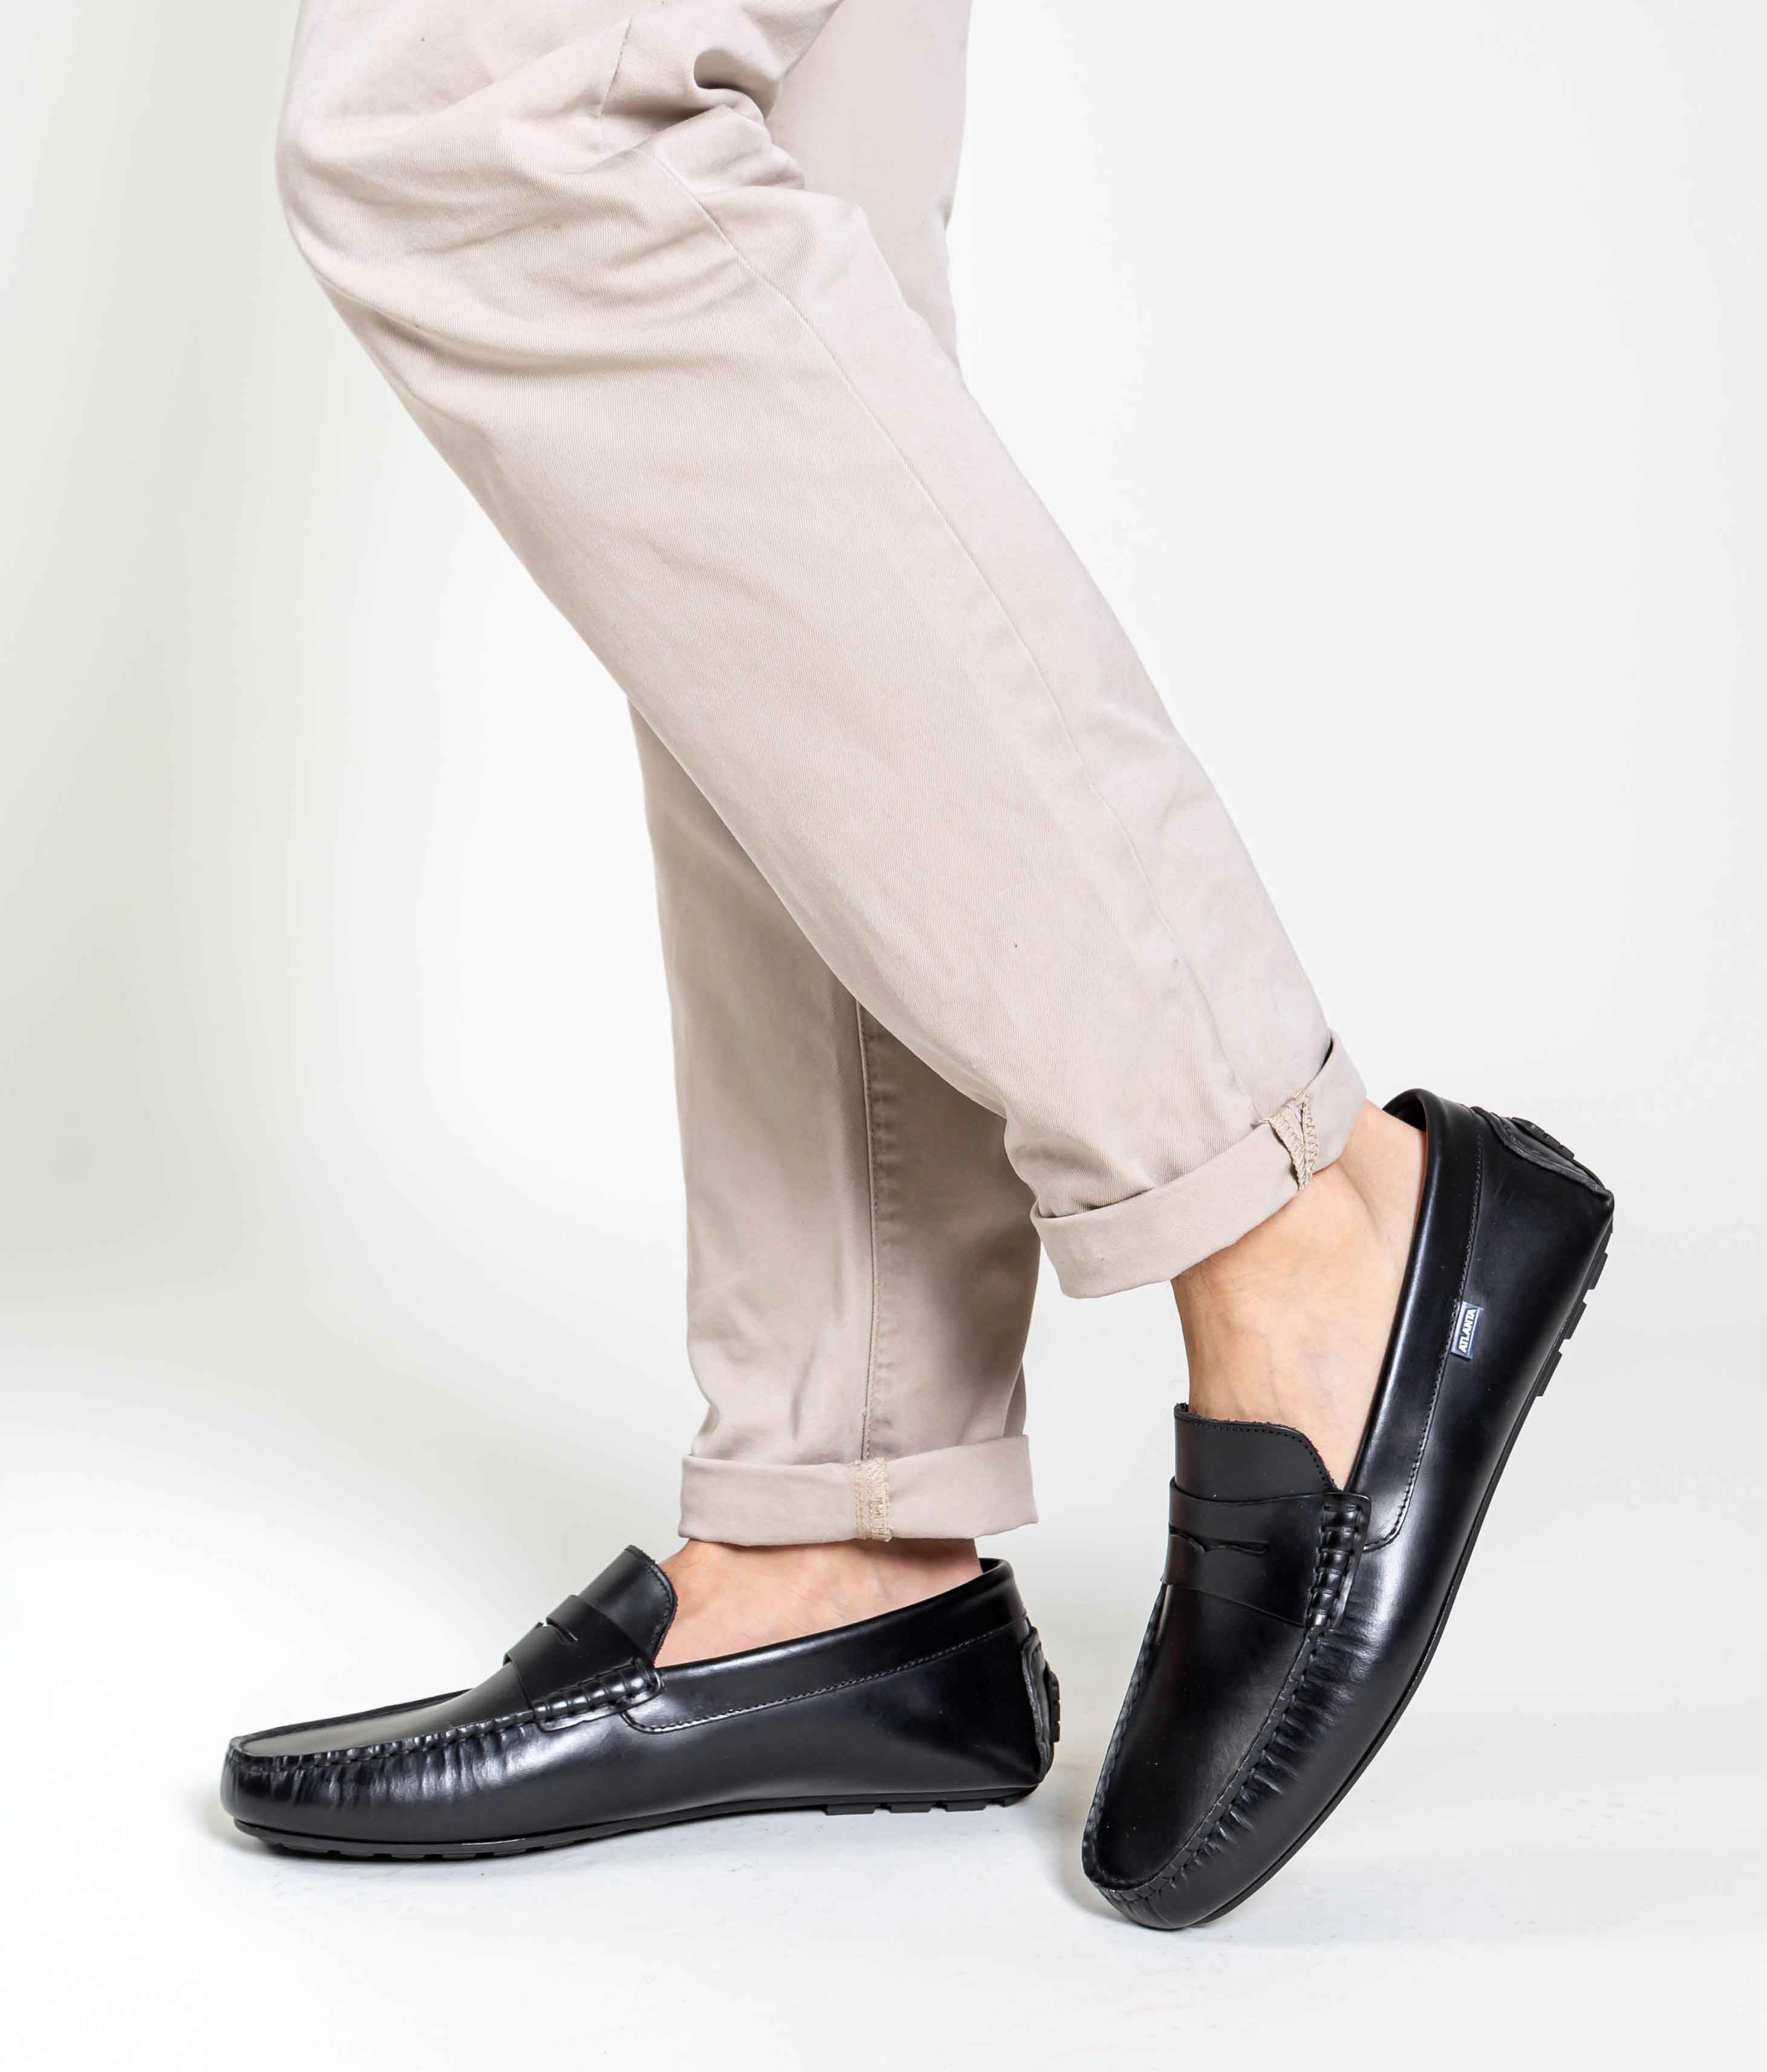 City Loafers in Pull Up Leather - Black - Atlanta Mocassin